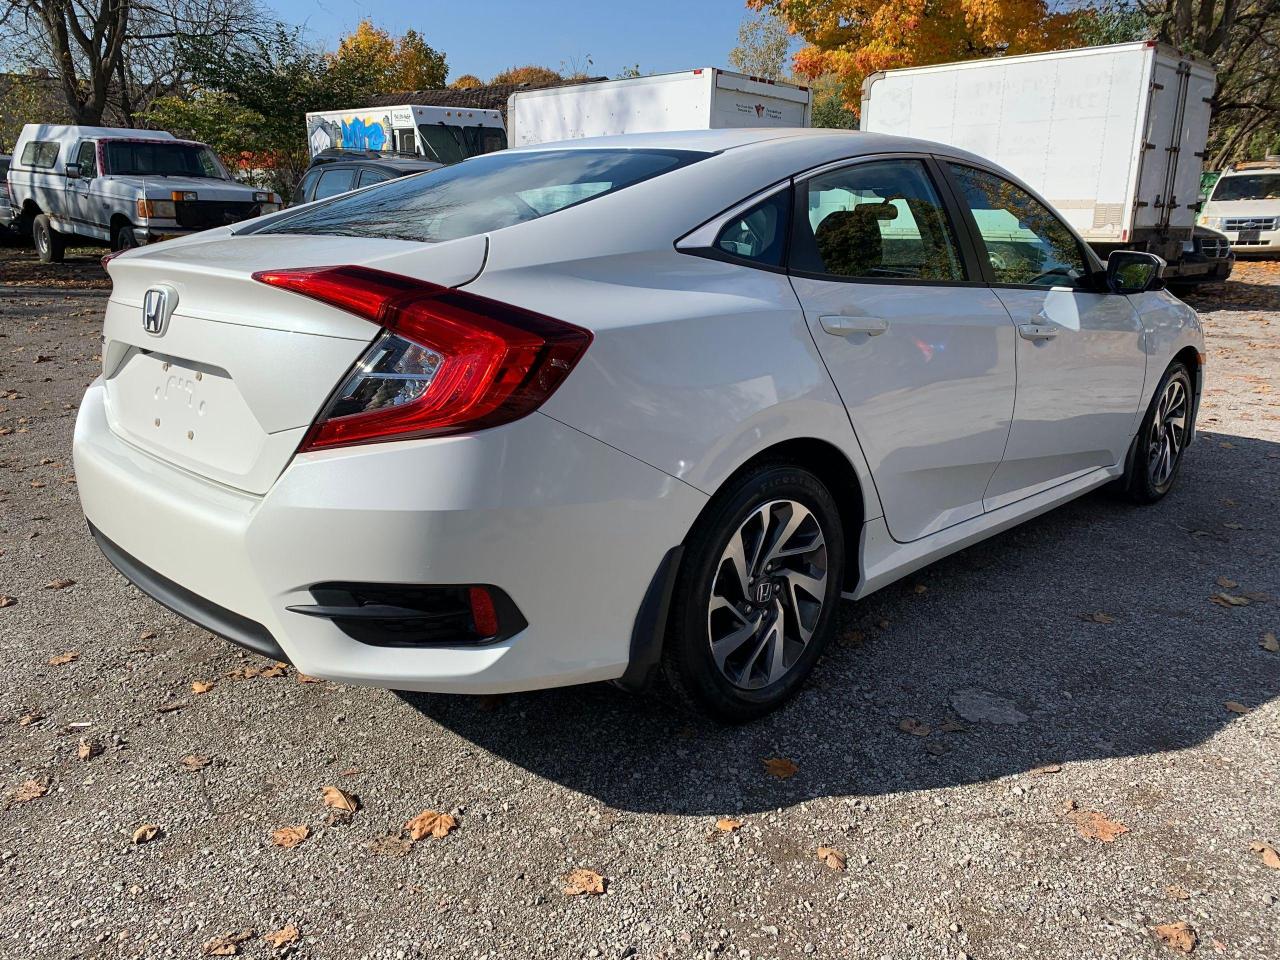 2017 Honda Civic EX, SUNROOF, NO ACIDENTS AND 1 OWNER - Photo #5